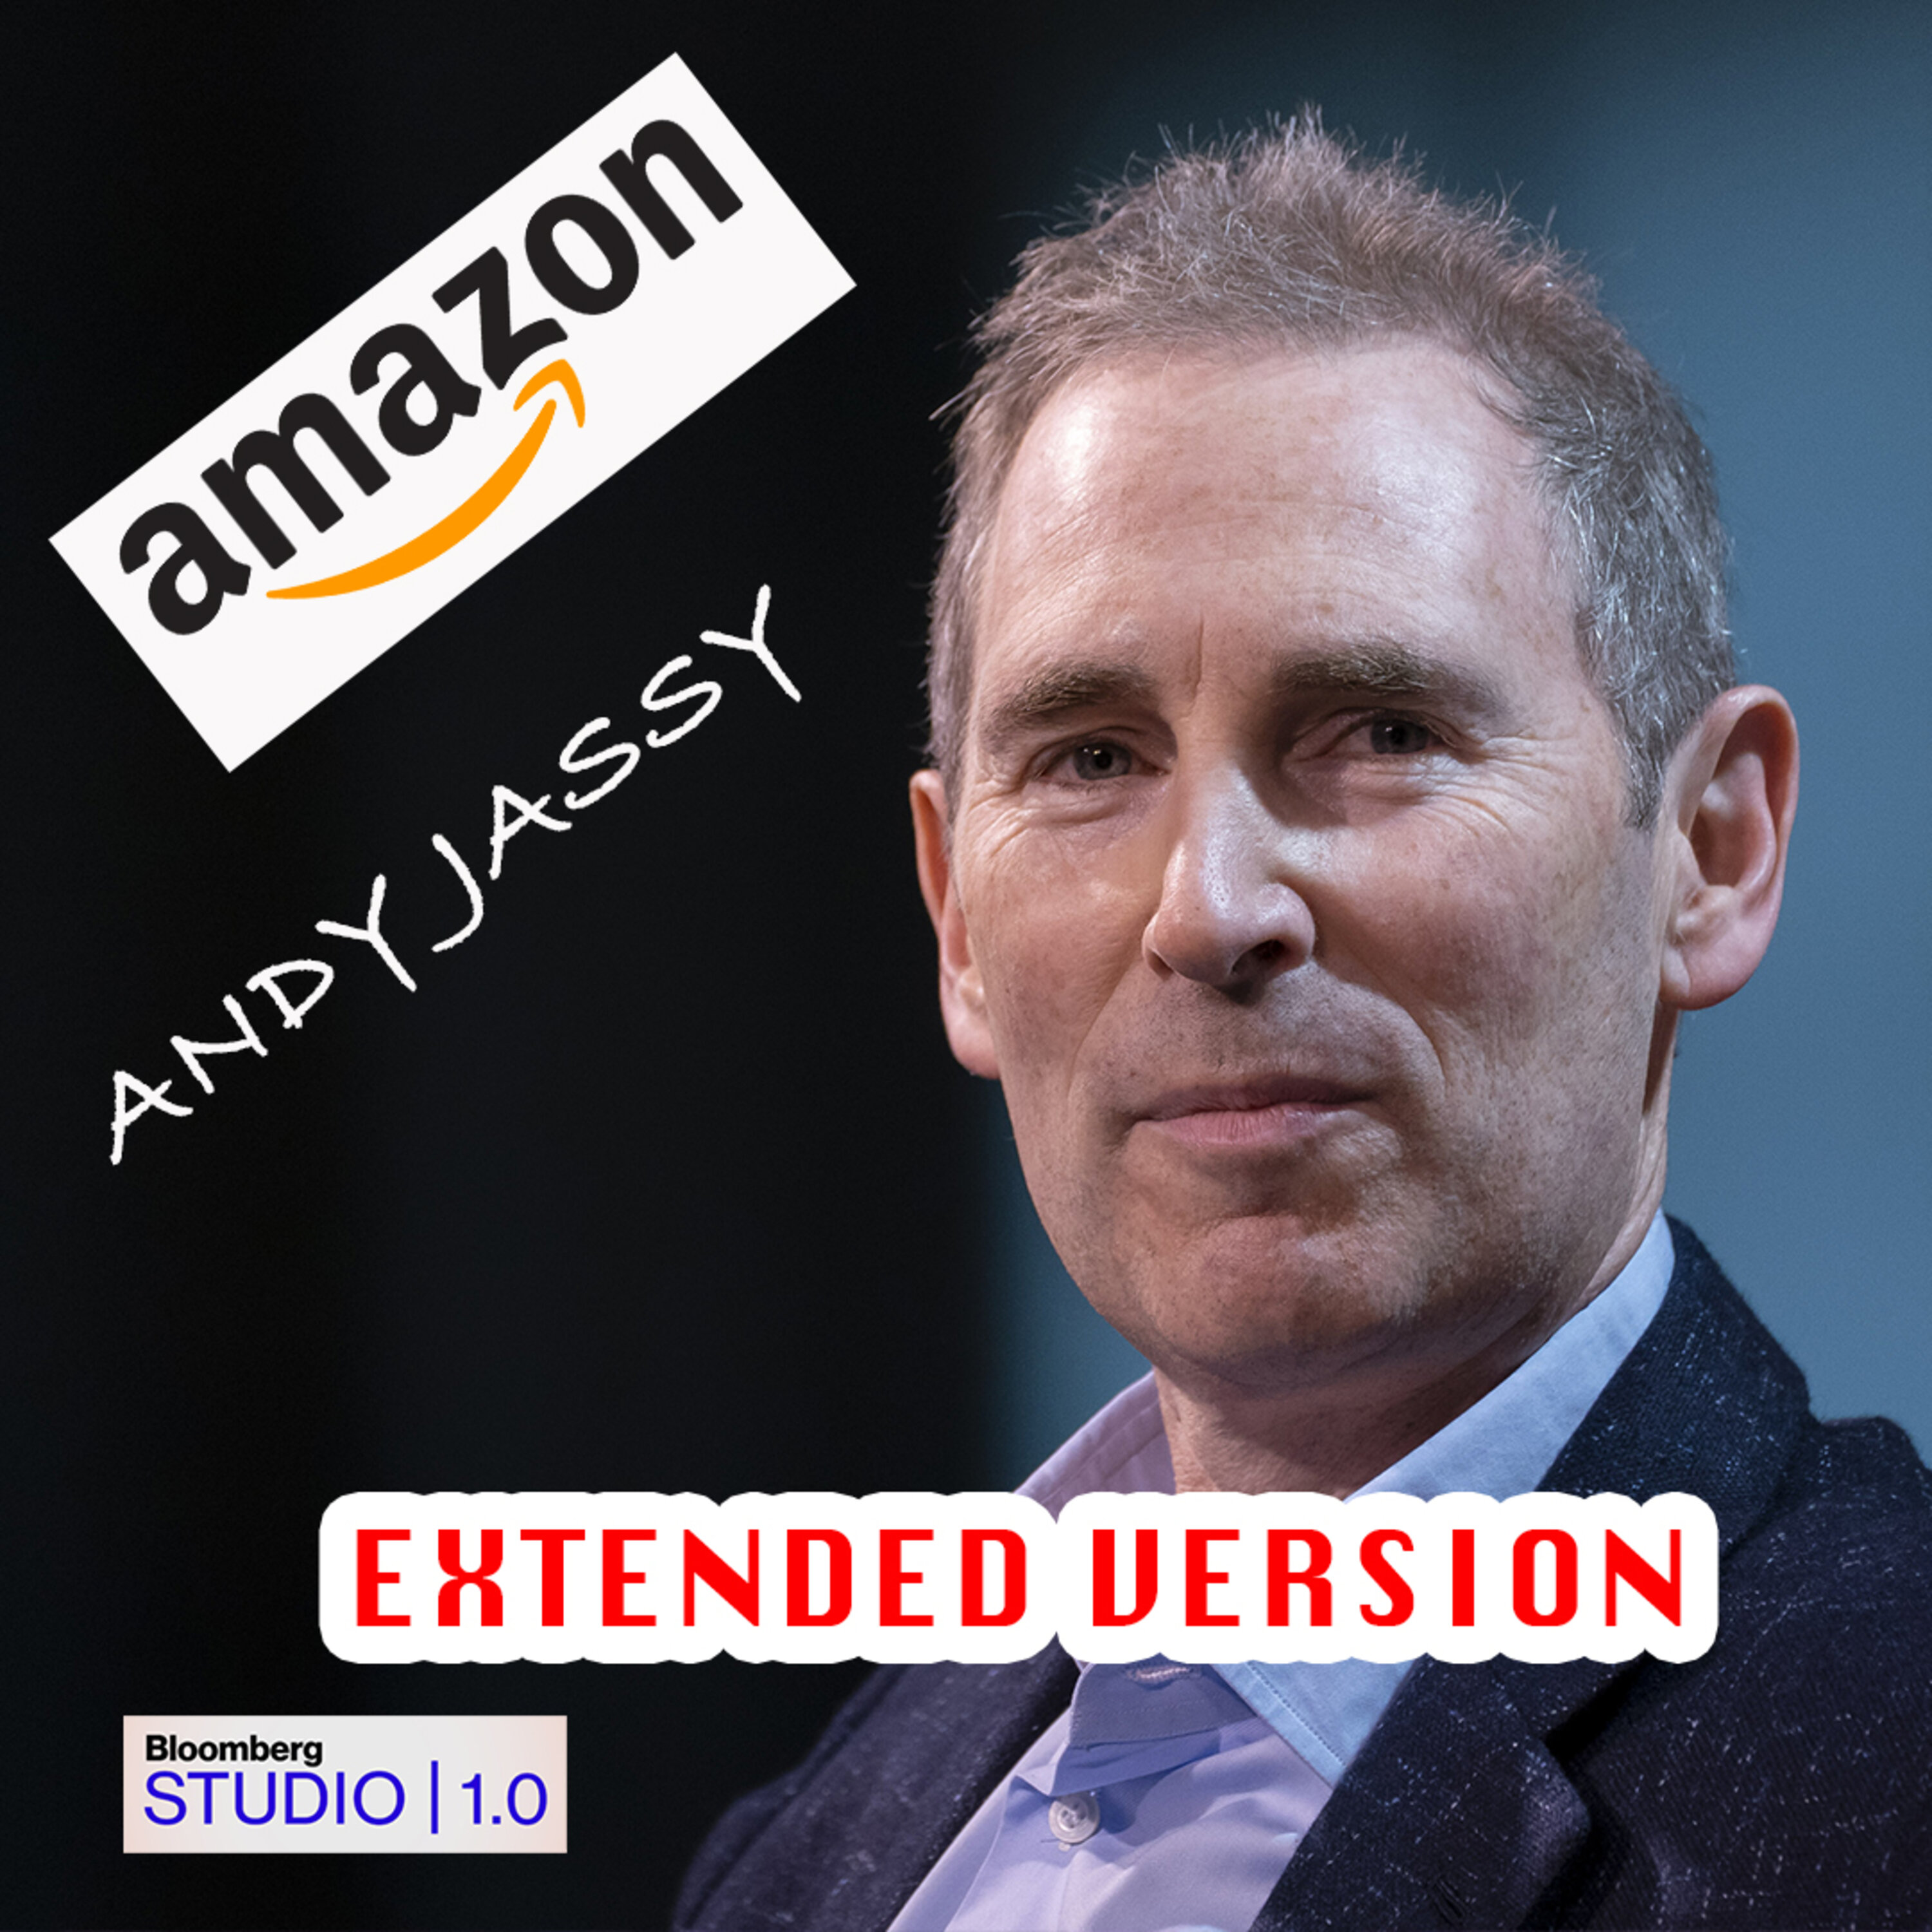 Amazon CEO Andy Jassy (EXTENDED VERSION)